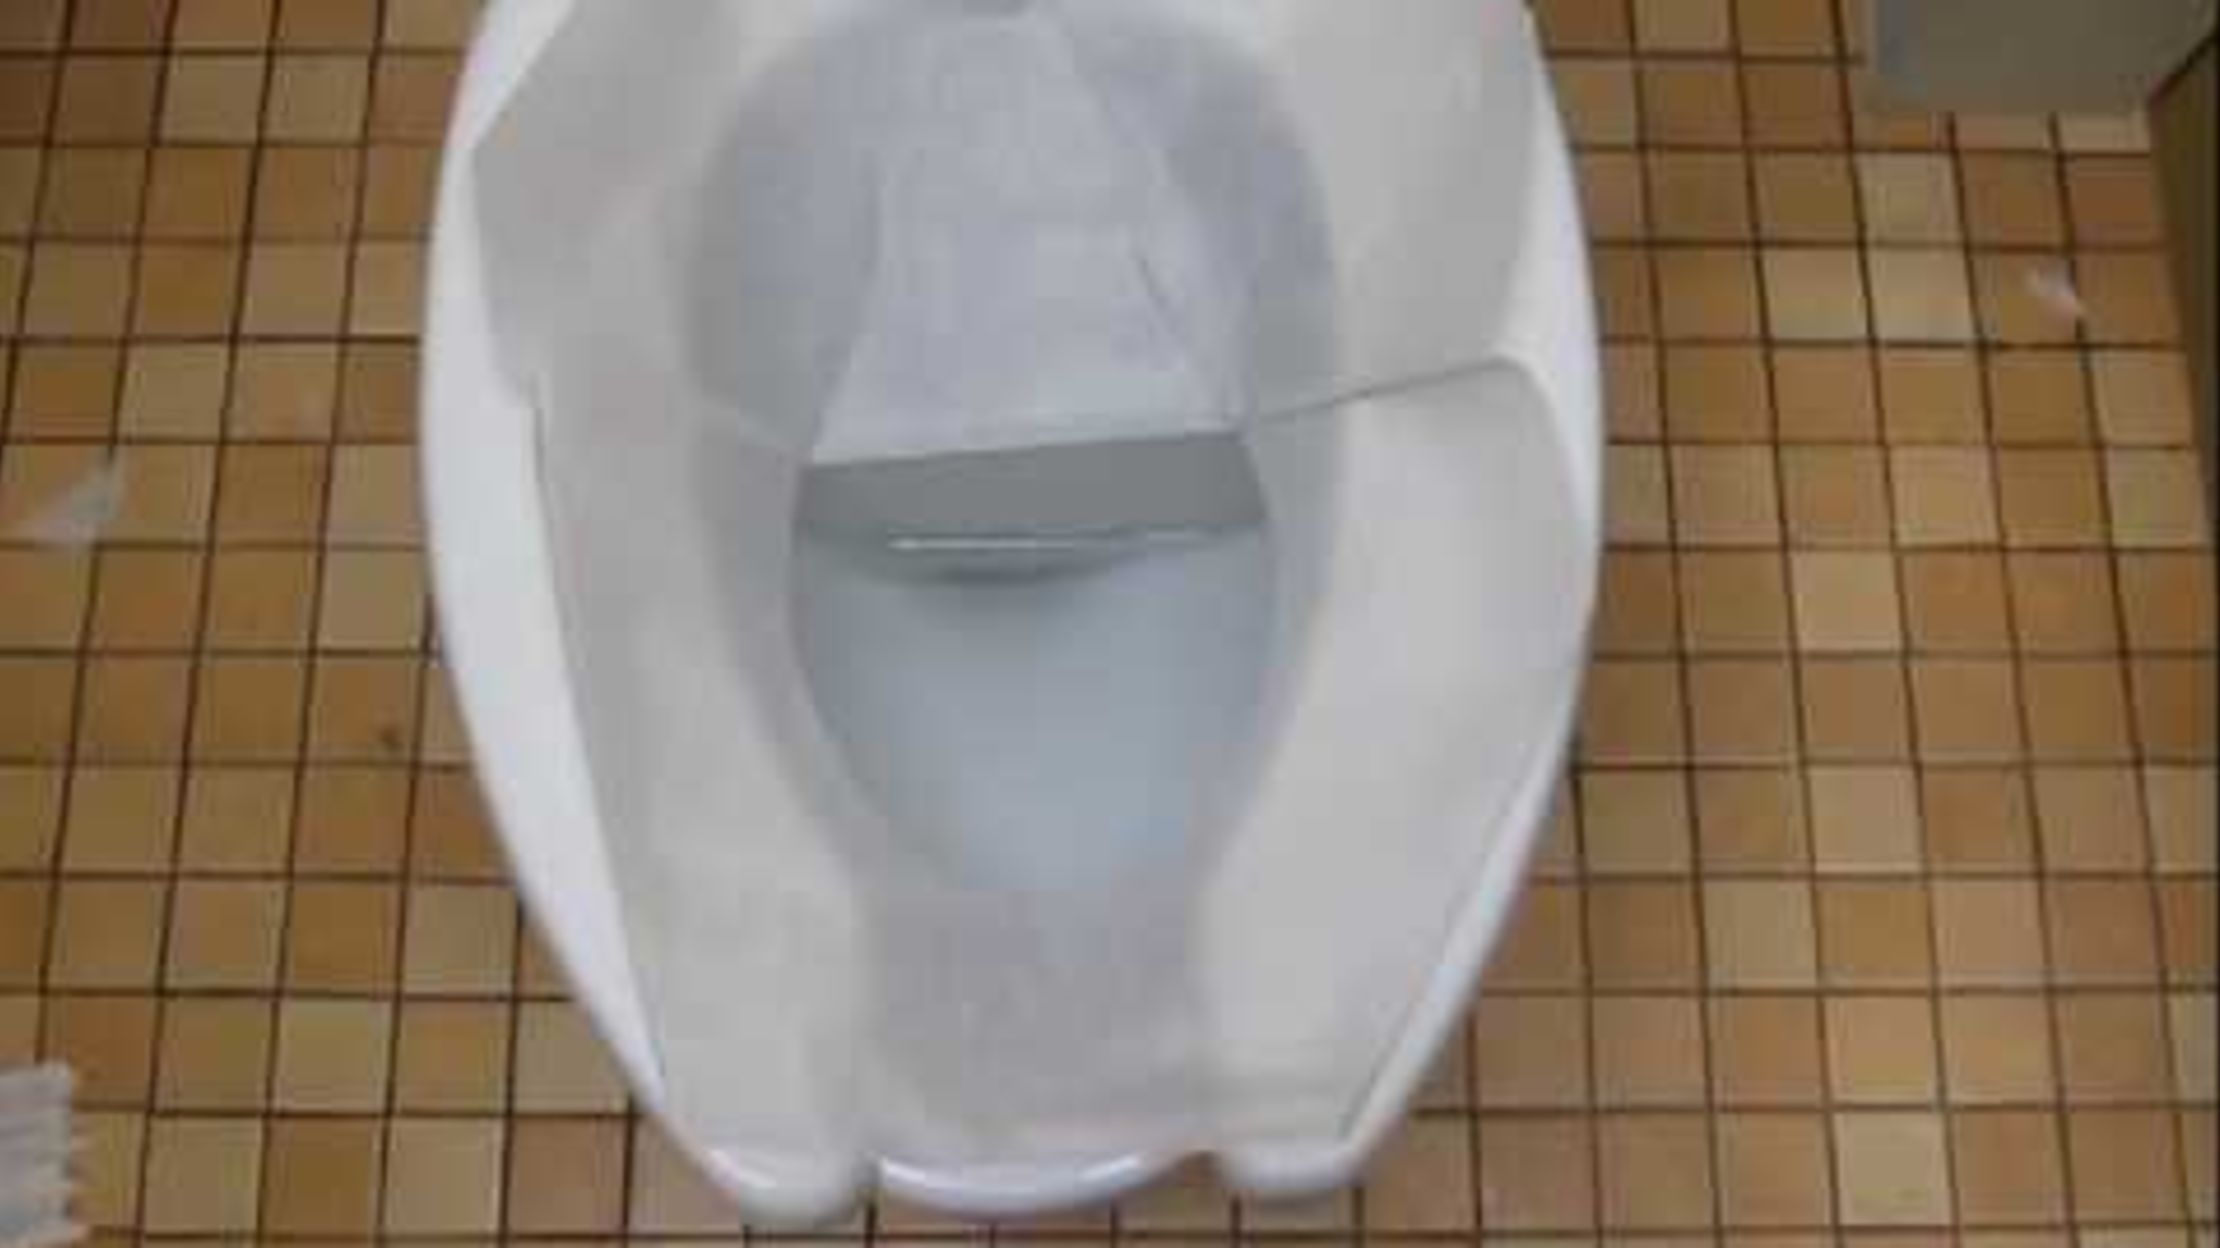 get toilet seat cover